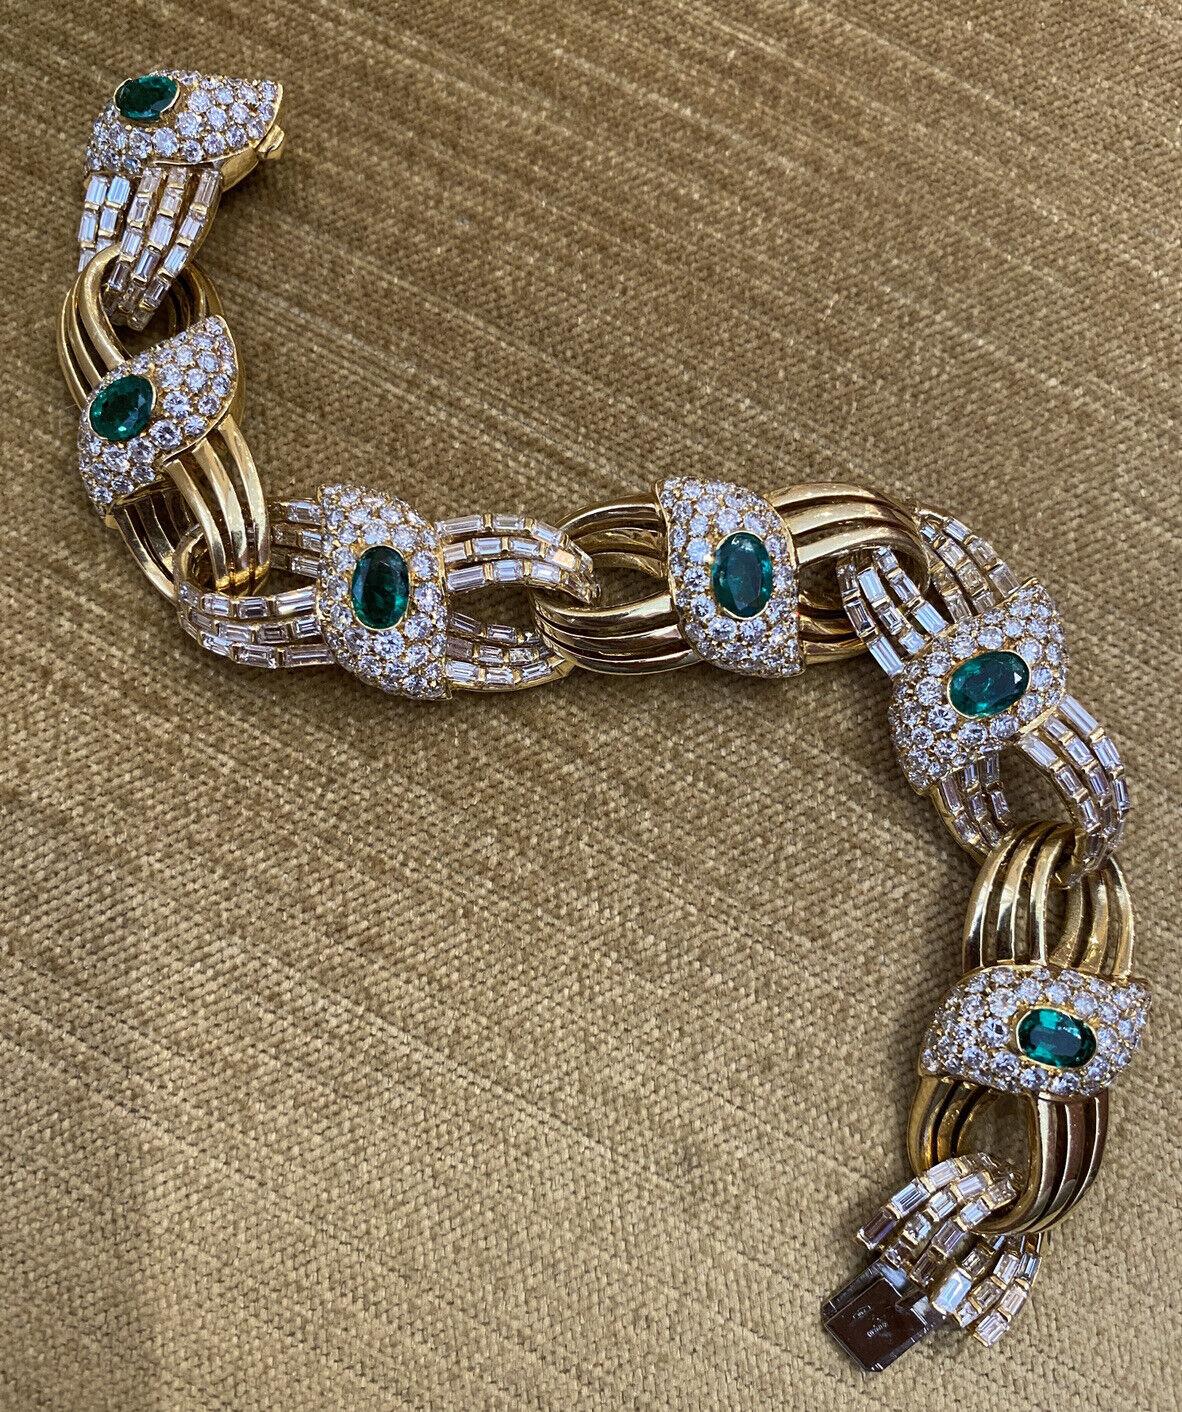 Emerald and Diamond Link Statement Bracelet by RCM in 18k Yellow Gold

Emerald and Diamond Bracelet features 6 deep vibrant green Oval shaped Emeralds surrounded with Pave set Round Brilliant Diamonds and Bar set Baguette Diamonds in 18k Yellow